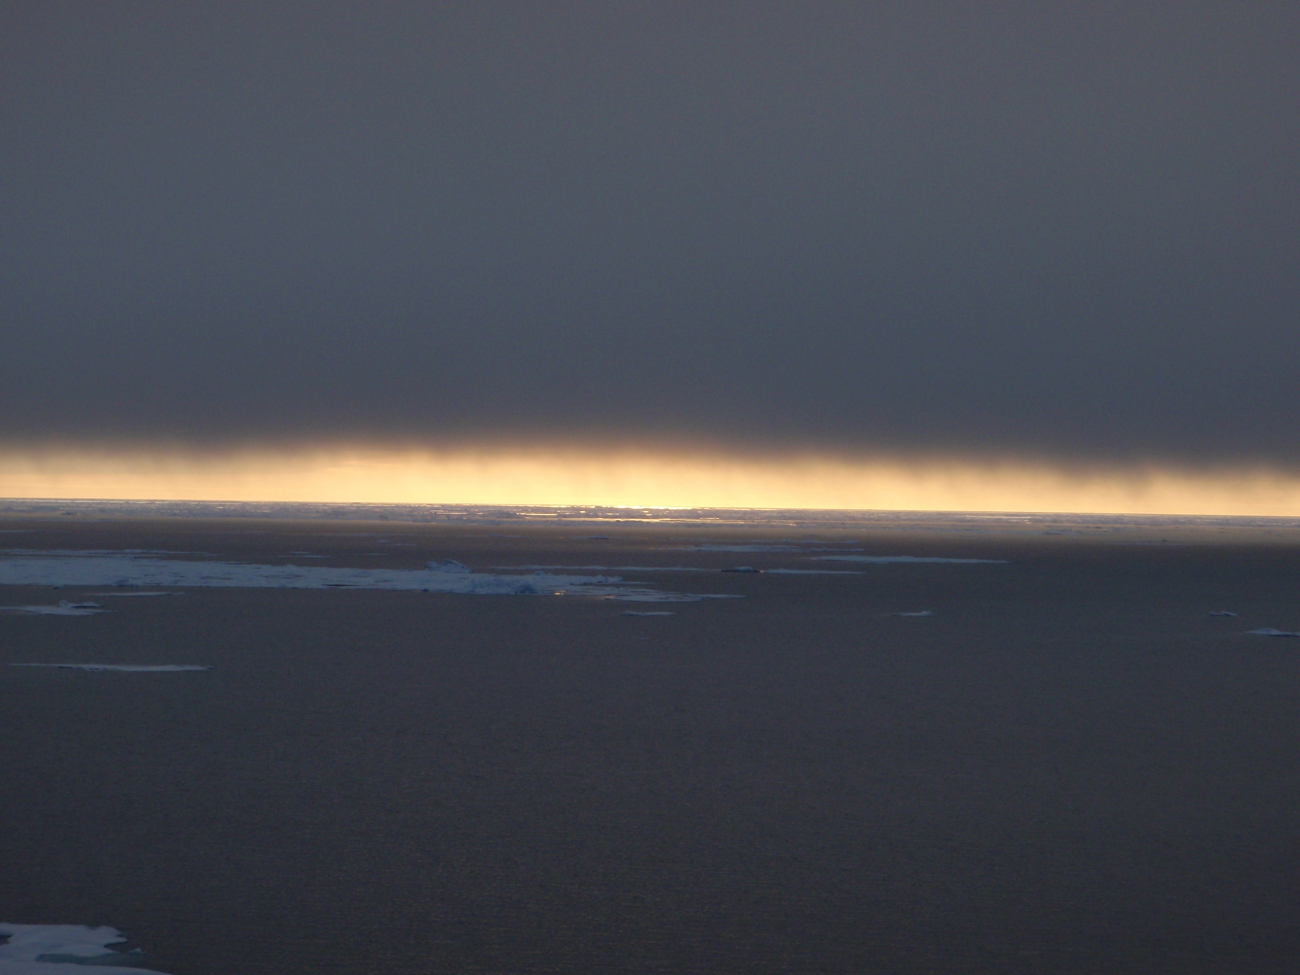 In a polynya looking towards sunlight playing on water while a blanket of cloudtotally obscures the sun